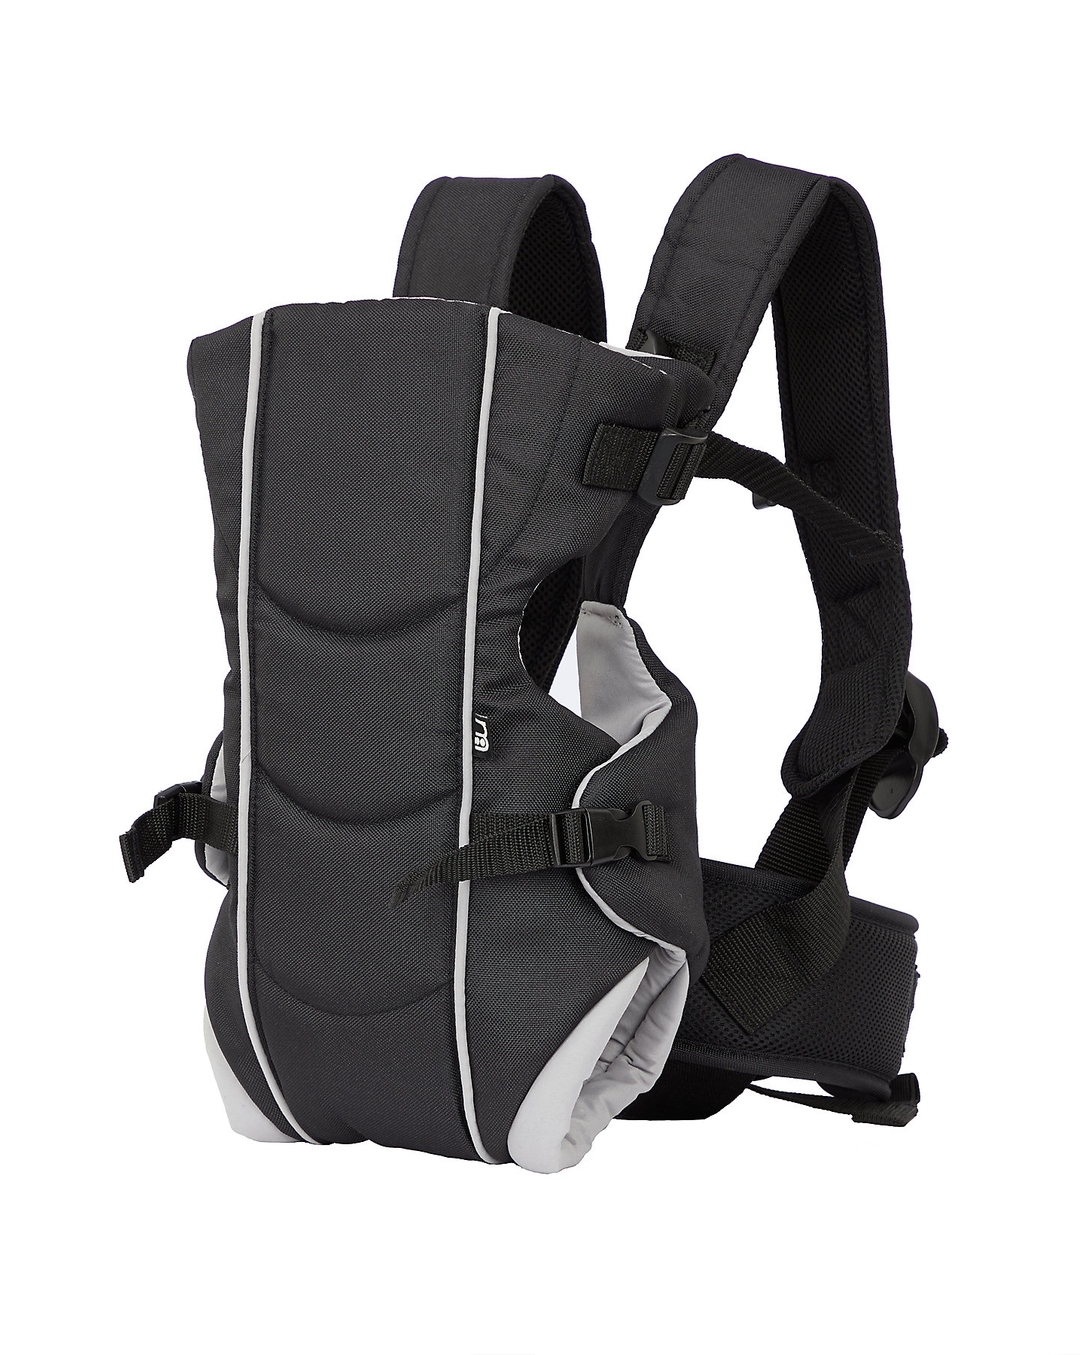 Buy Mothercare Carr 3 Position Baby Carrier Black Online at Best